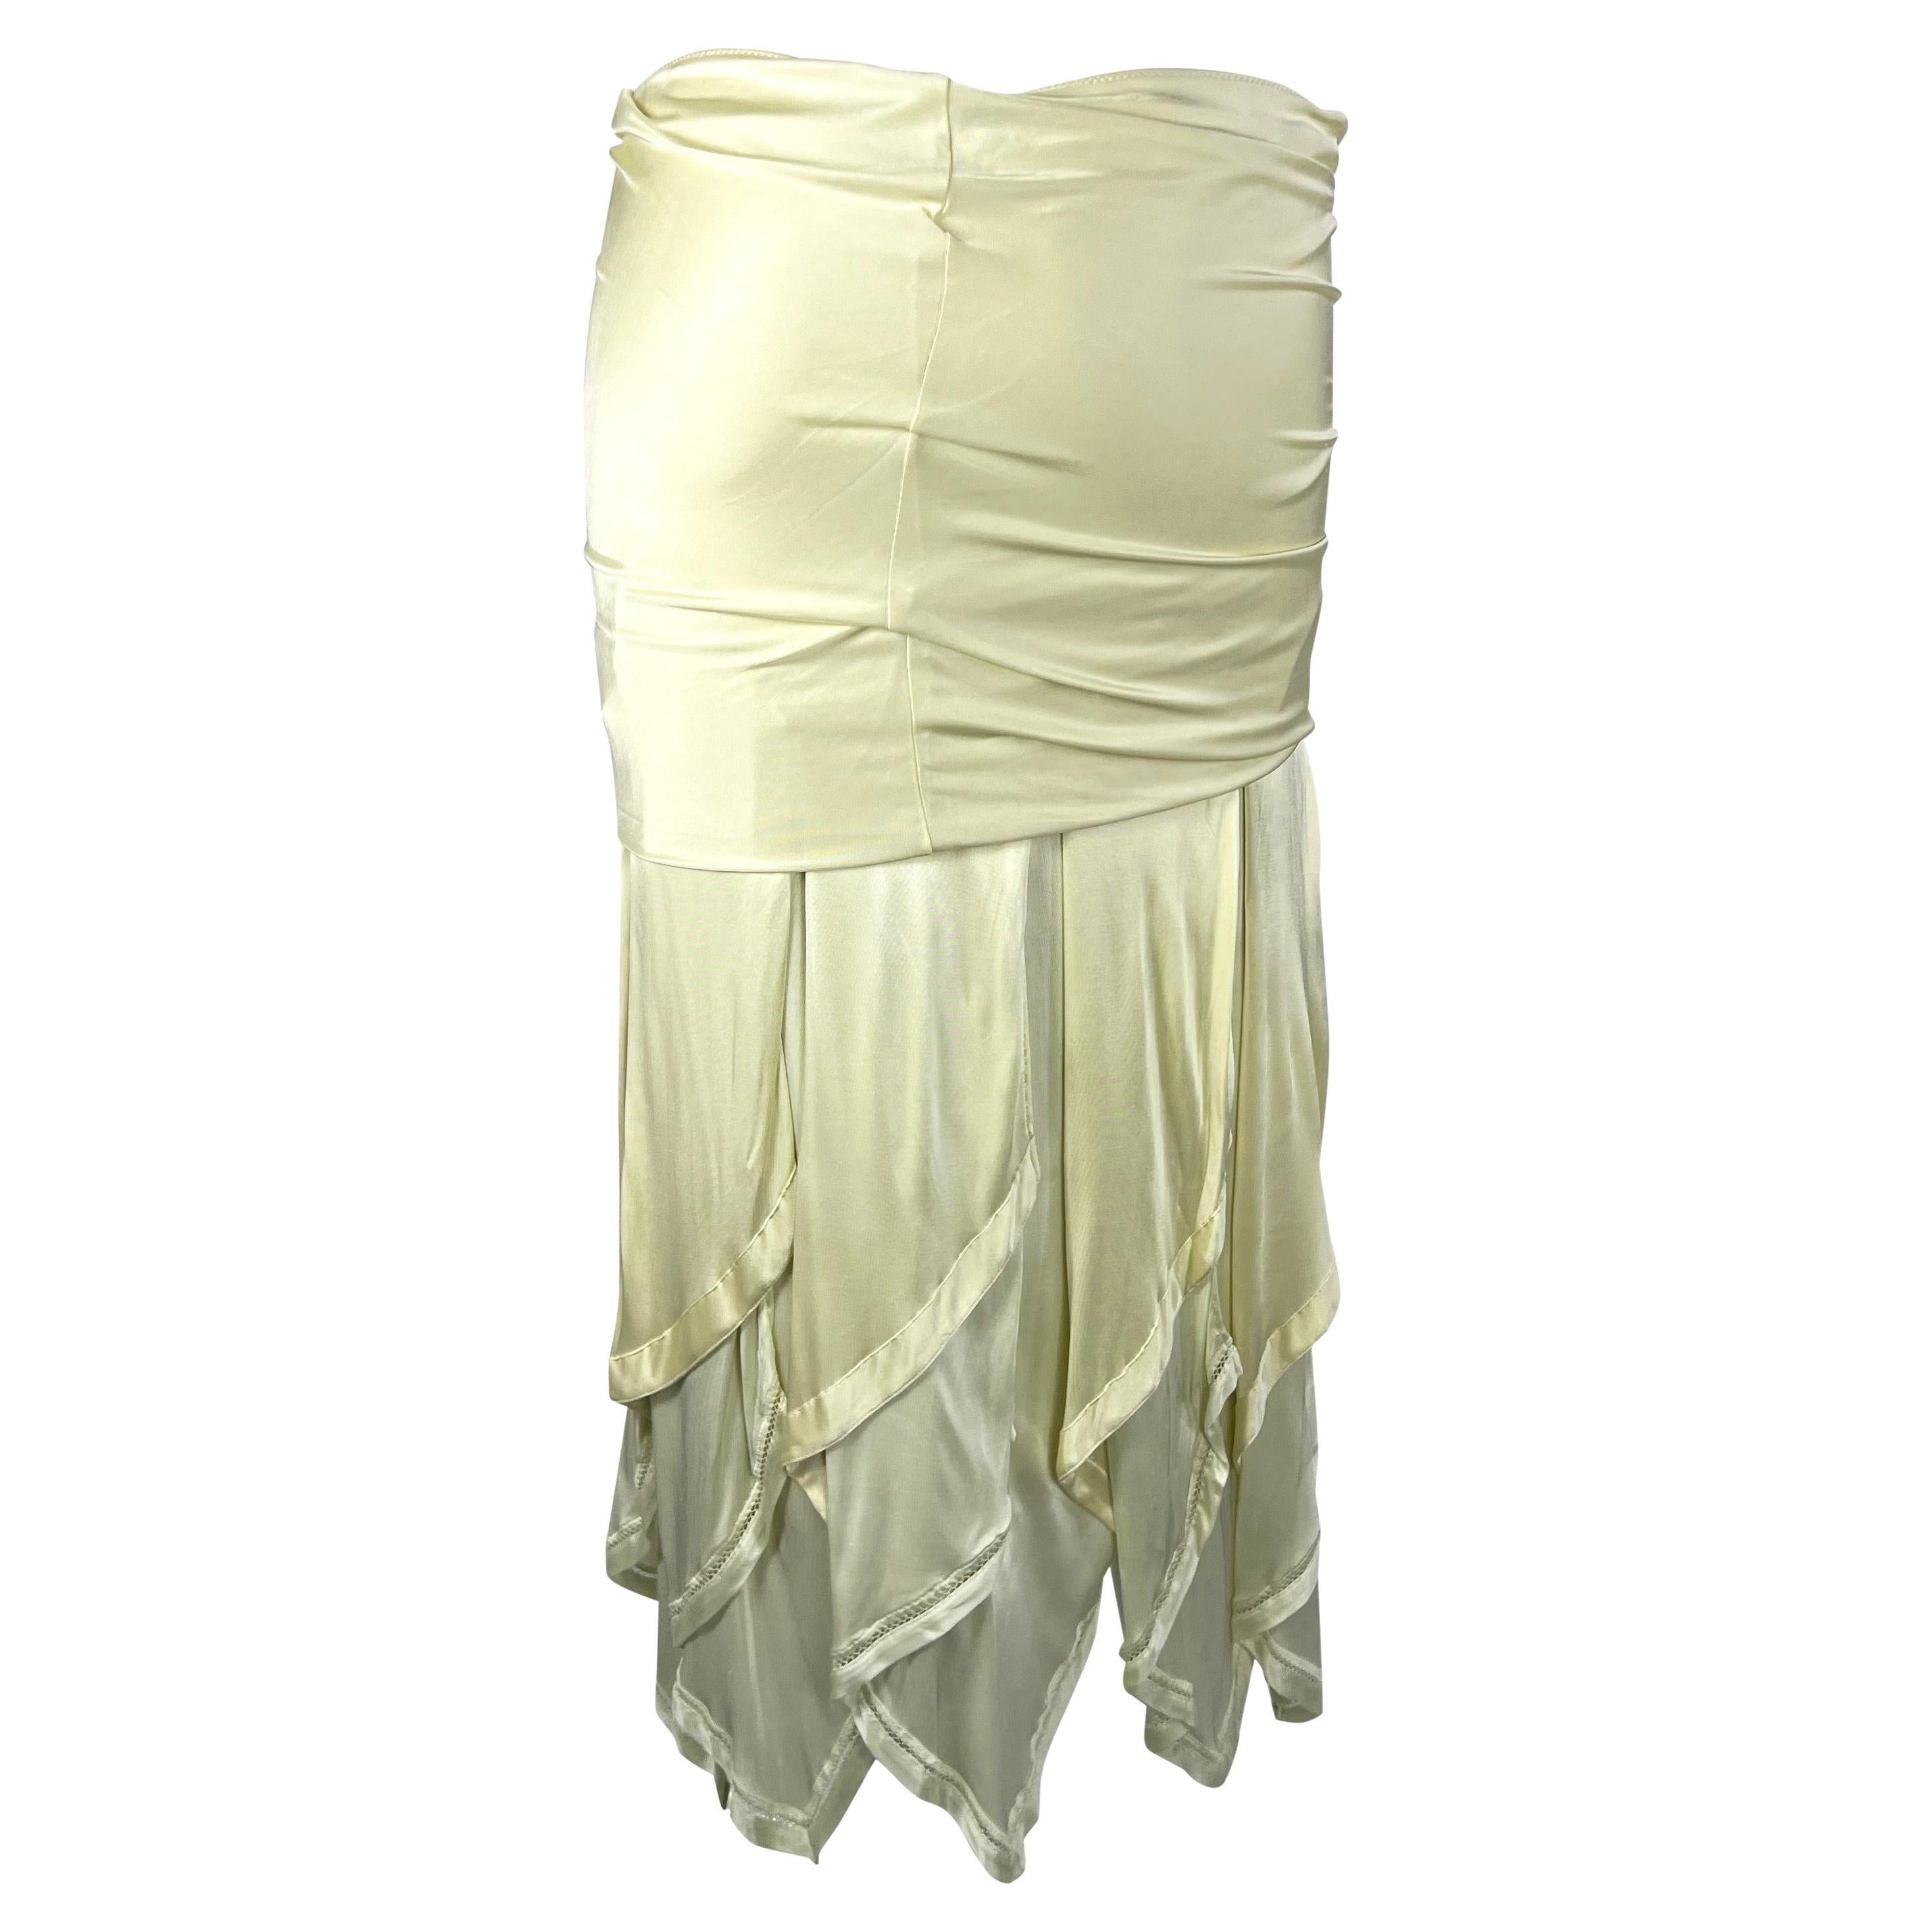 S/S 2004 Yves Saint Laurent by Tom Ford Runway Off-White Stretch Ruffle Skirt For Sale 2